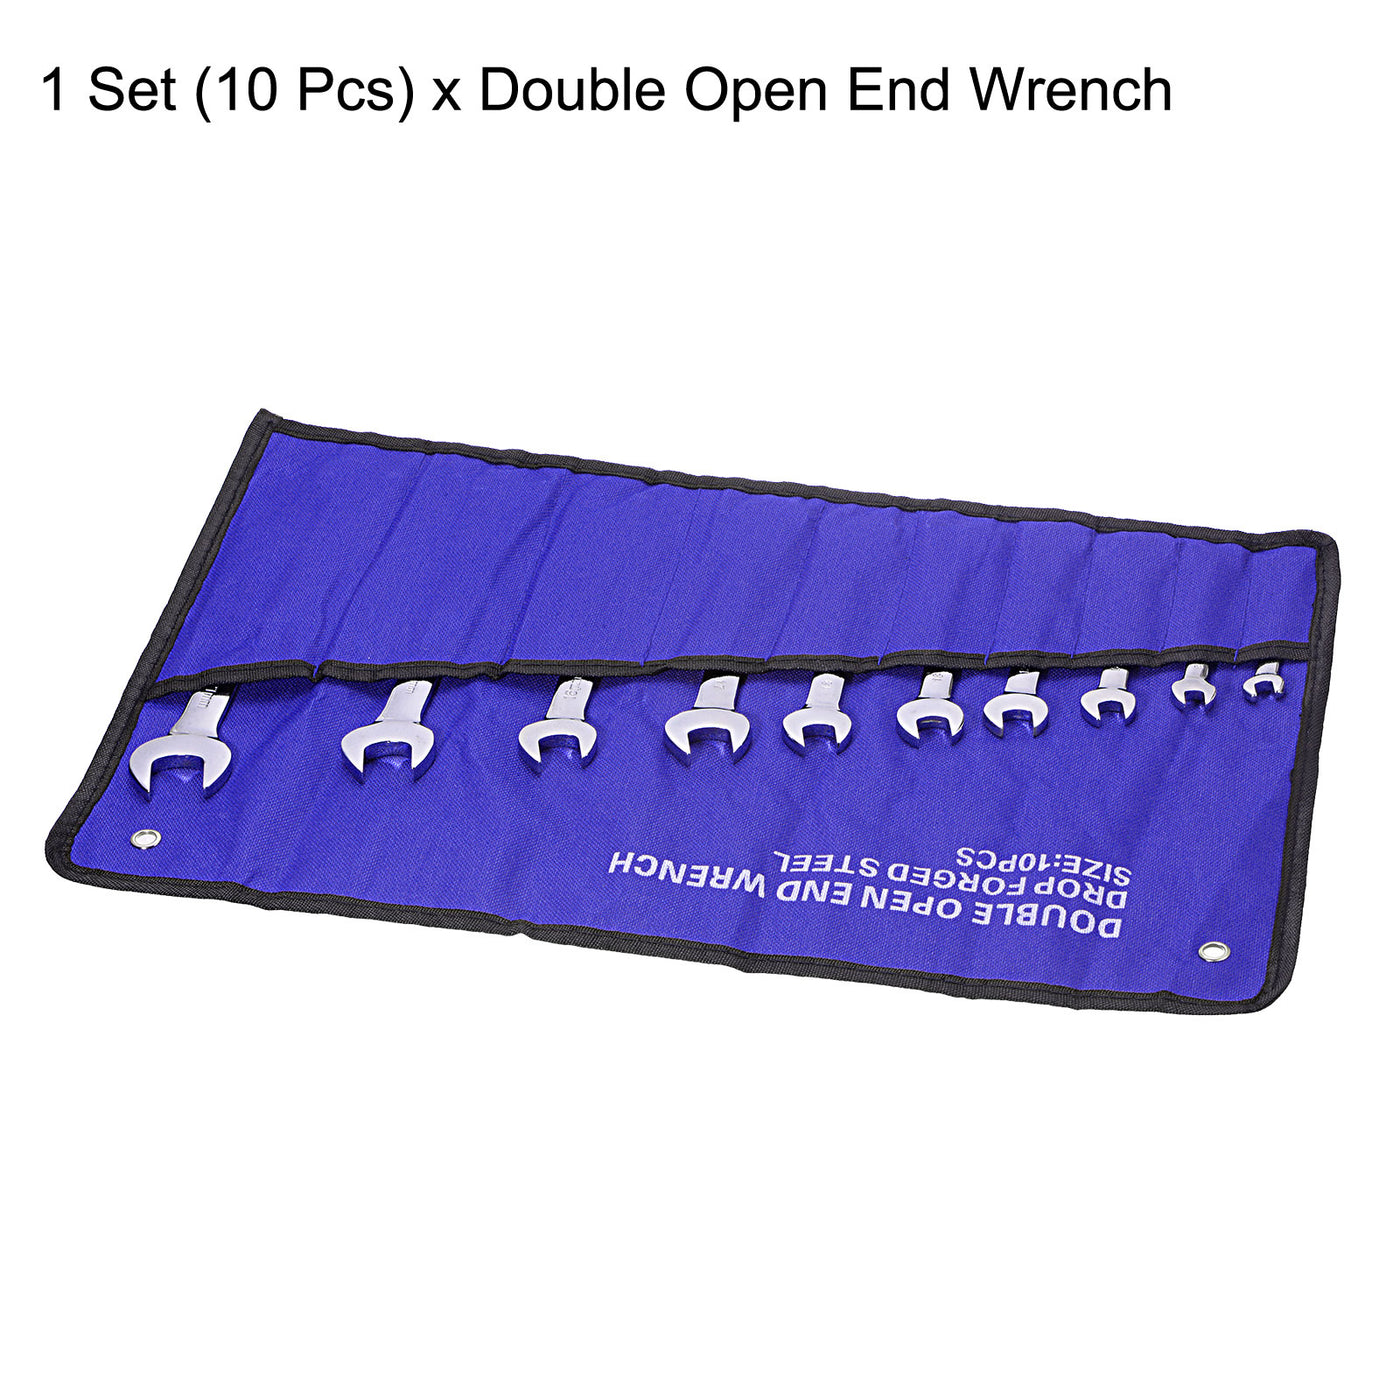 uxcell Uxcell Double Open-End Wrench Set, 5.5-21mm Metric CR-V with Rolling Pouch, 10-Piece